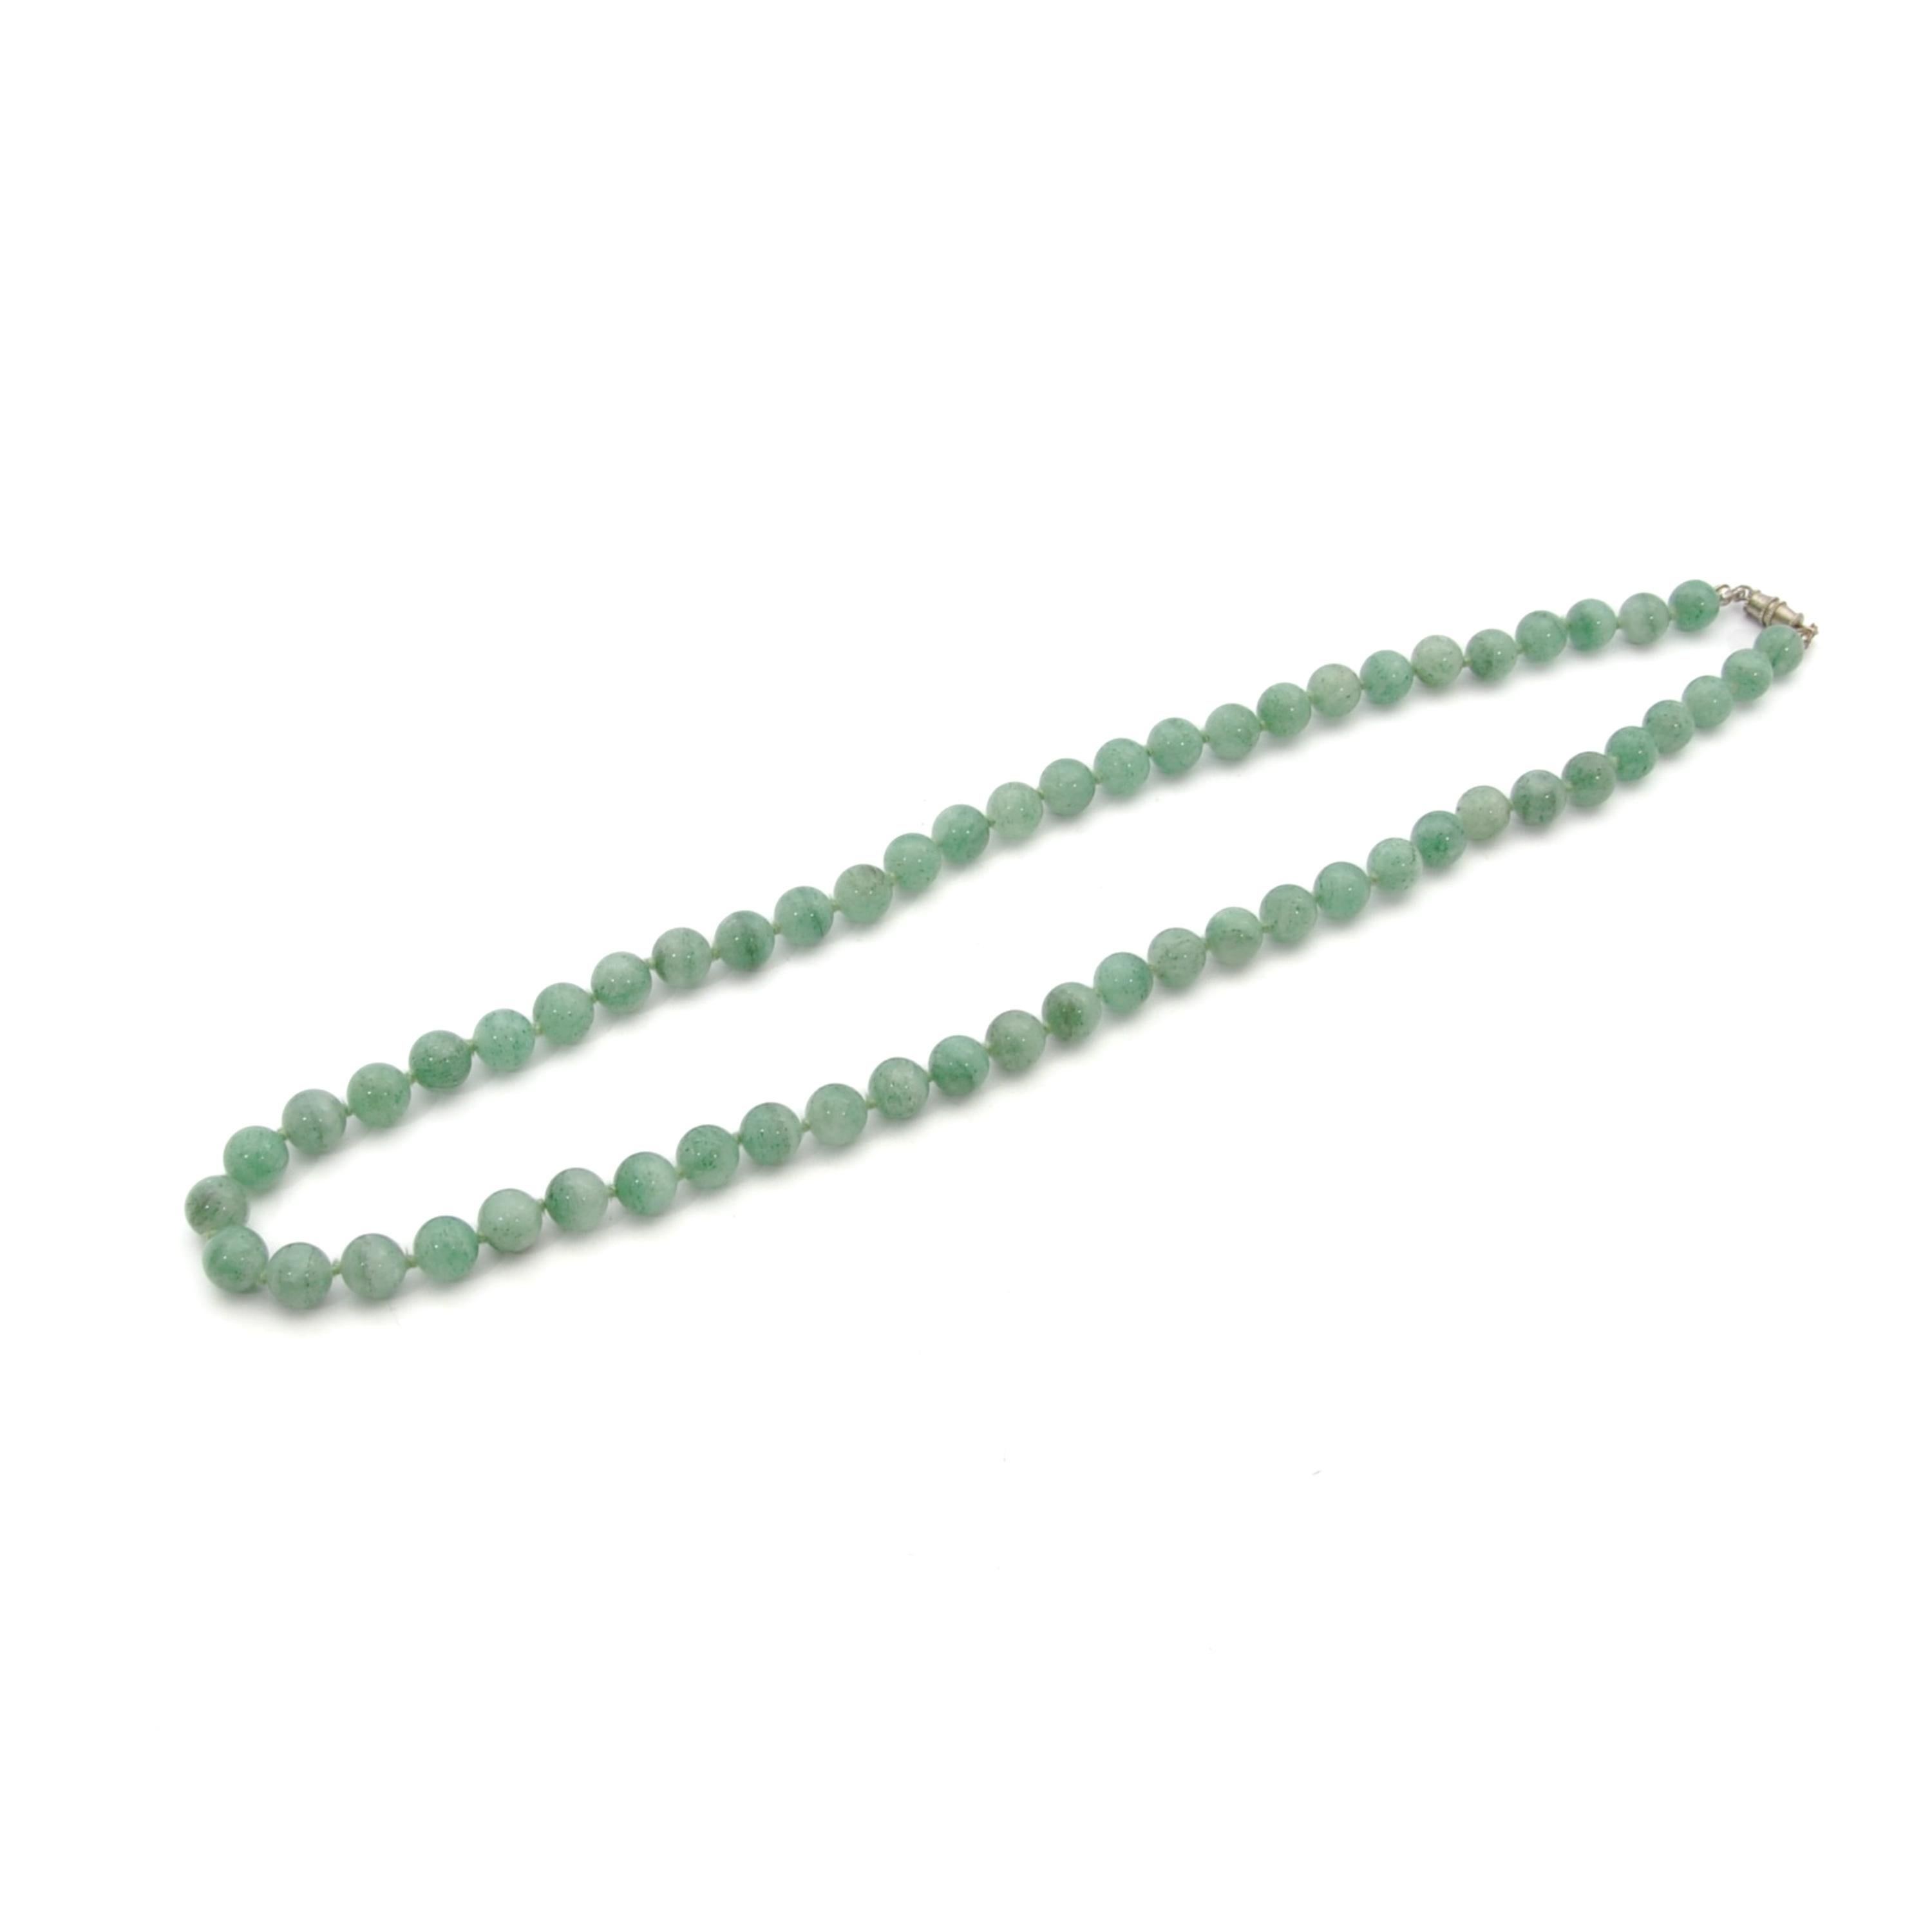 A beautiful polished natural green silky glow aventurine beaded necklace. Aventurine is an eye-catching crystal that is adored by many for its beautiful shiny appearance. The presence of the mineral fuchsite gives aventurine its unique green tone